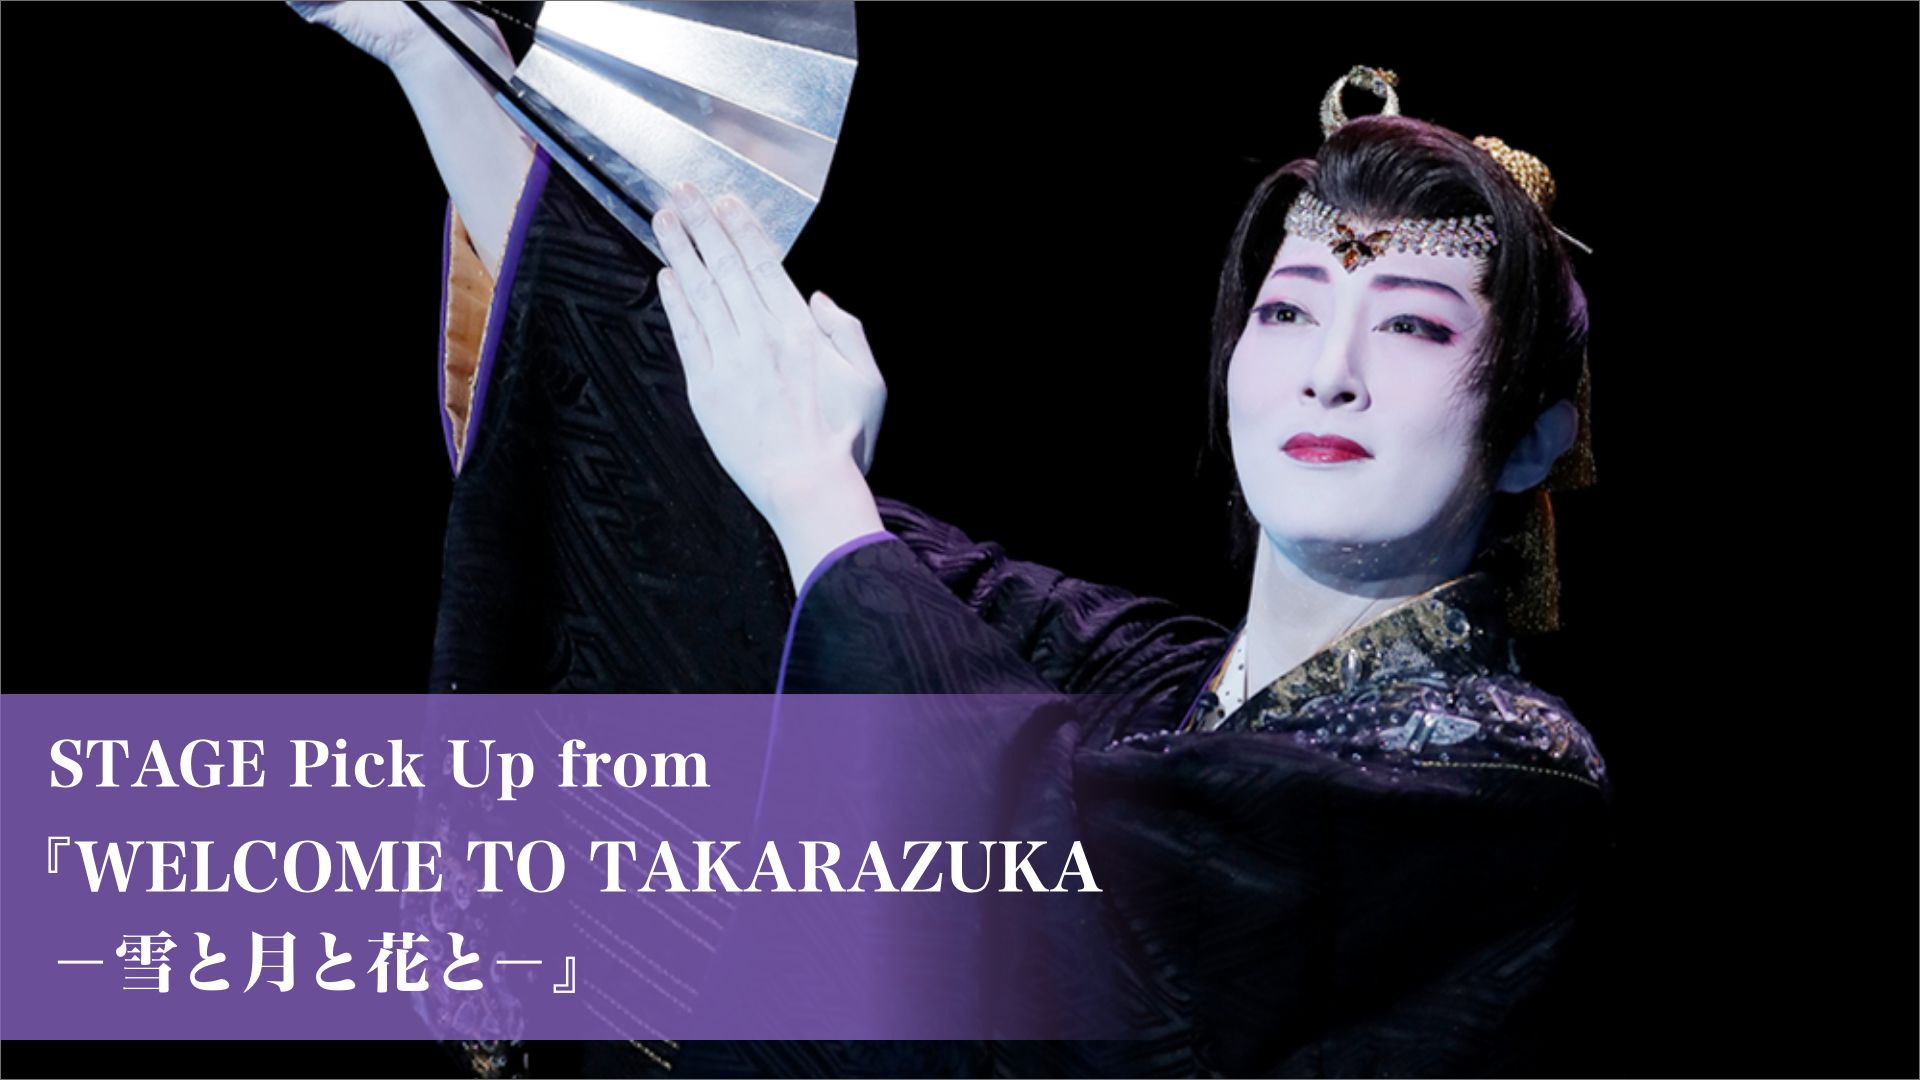 STAGE Pick Up from 『WELCOME TO TAKARAZUKA -雪と月と花と-』